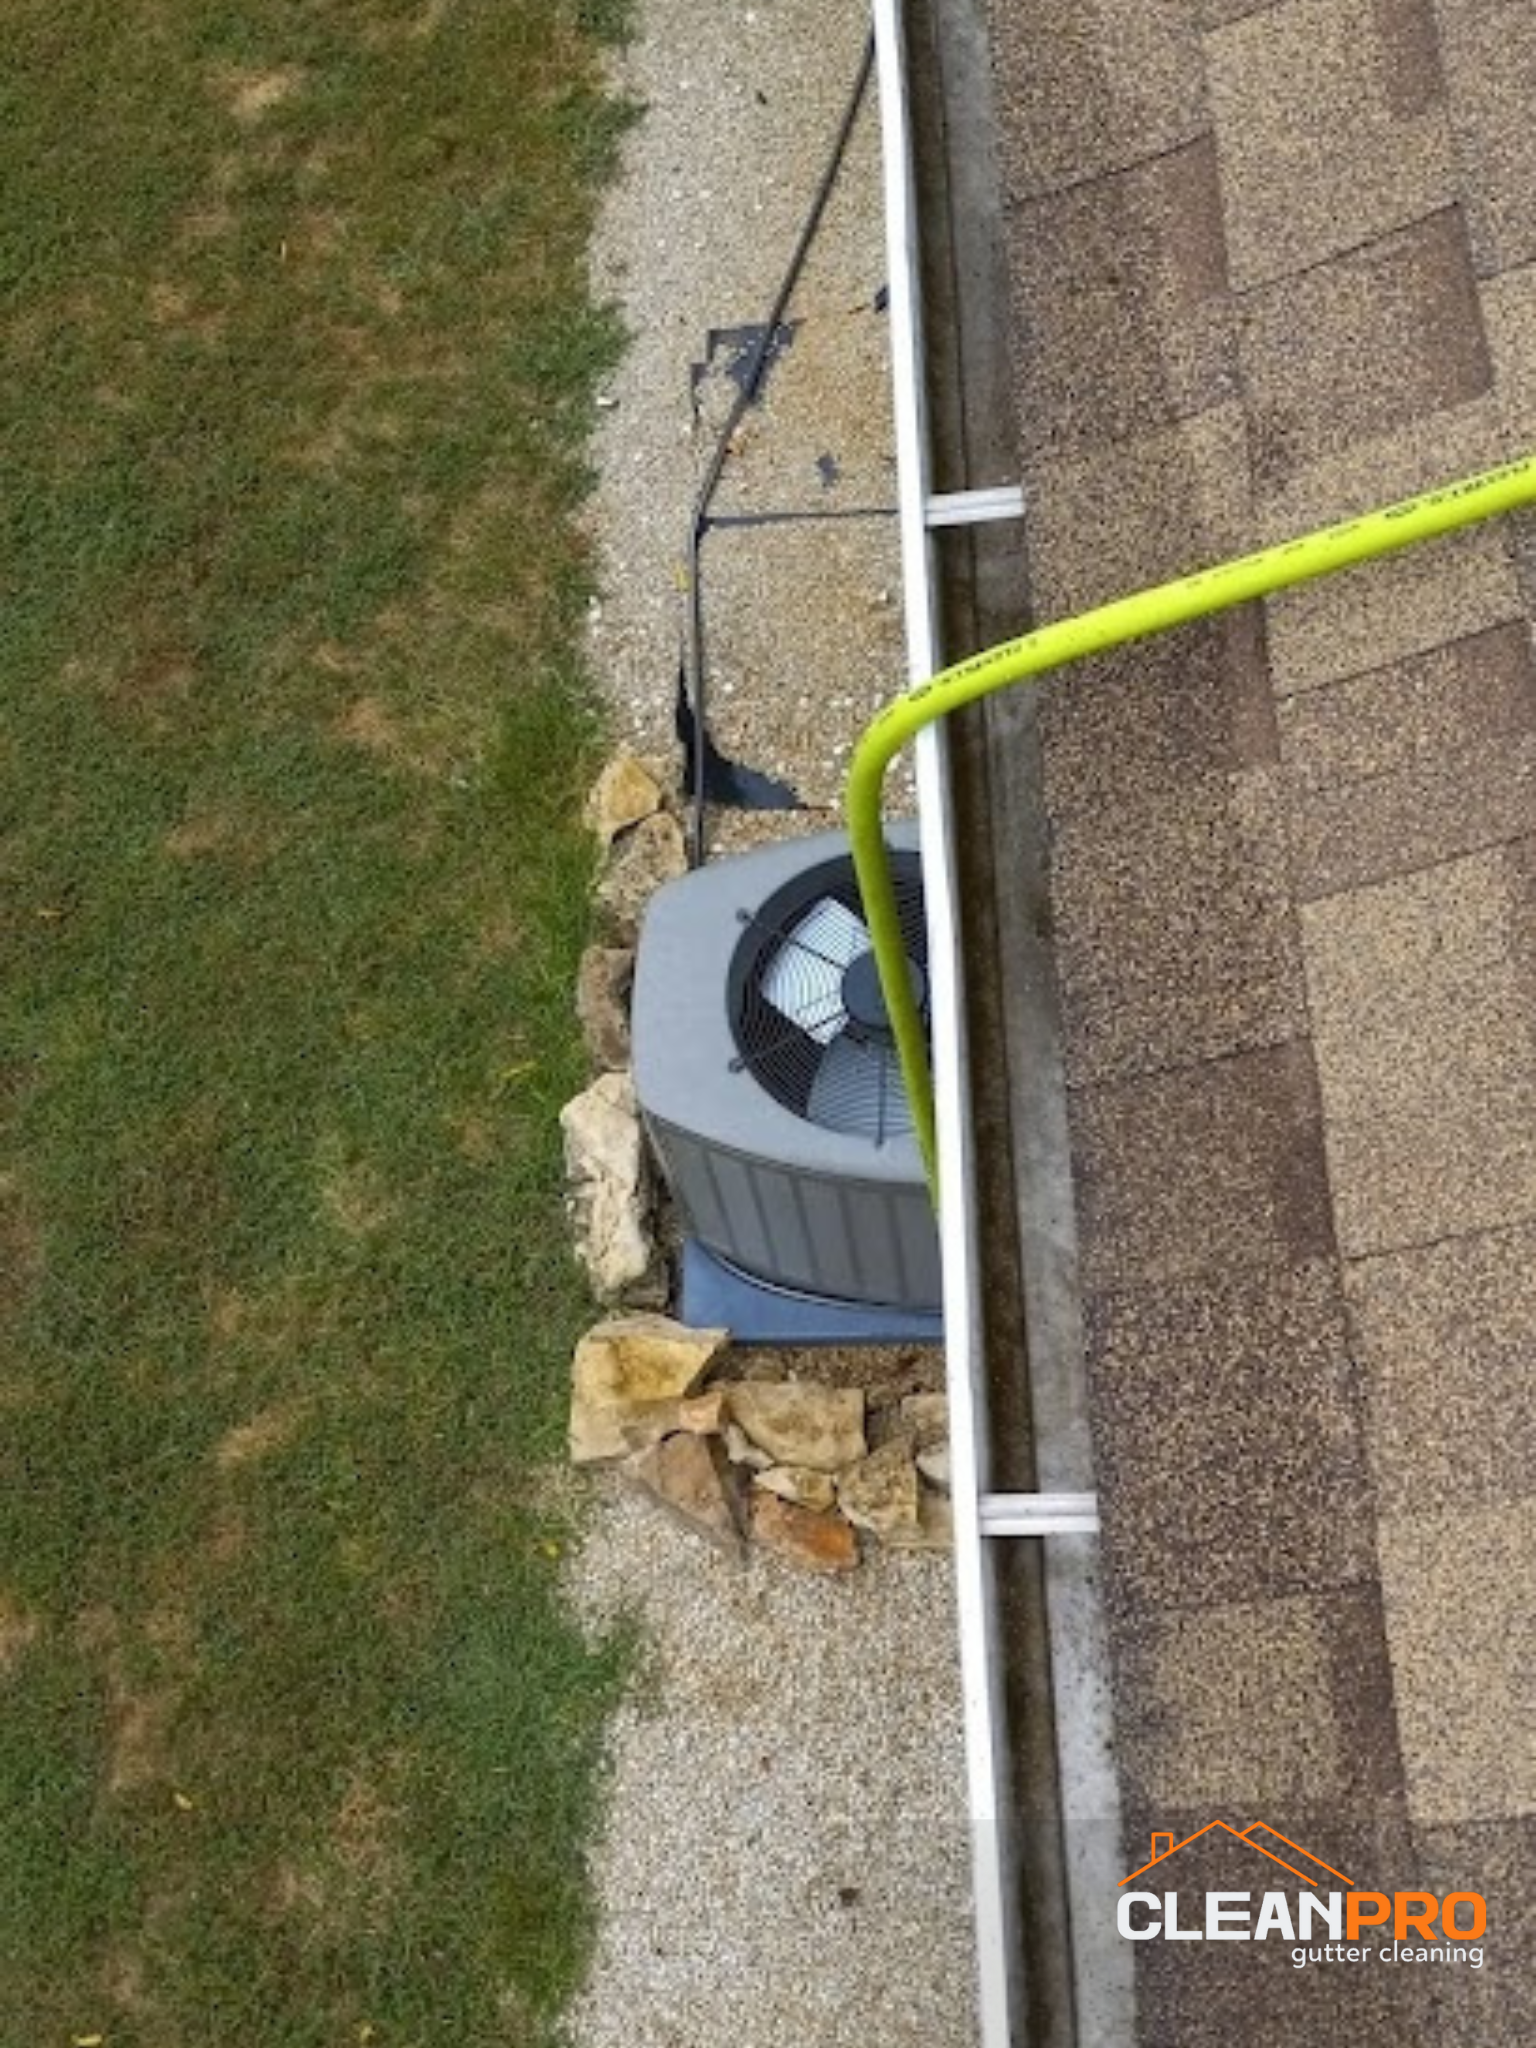 Gutter Cleaning in Sarasota for Daniel Home